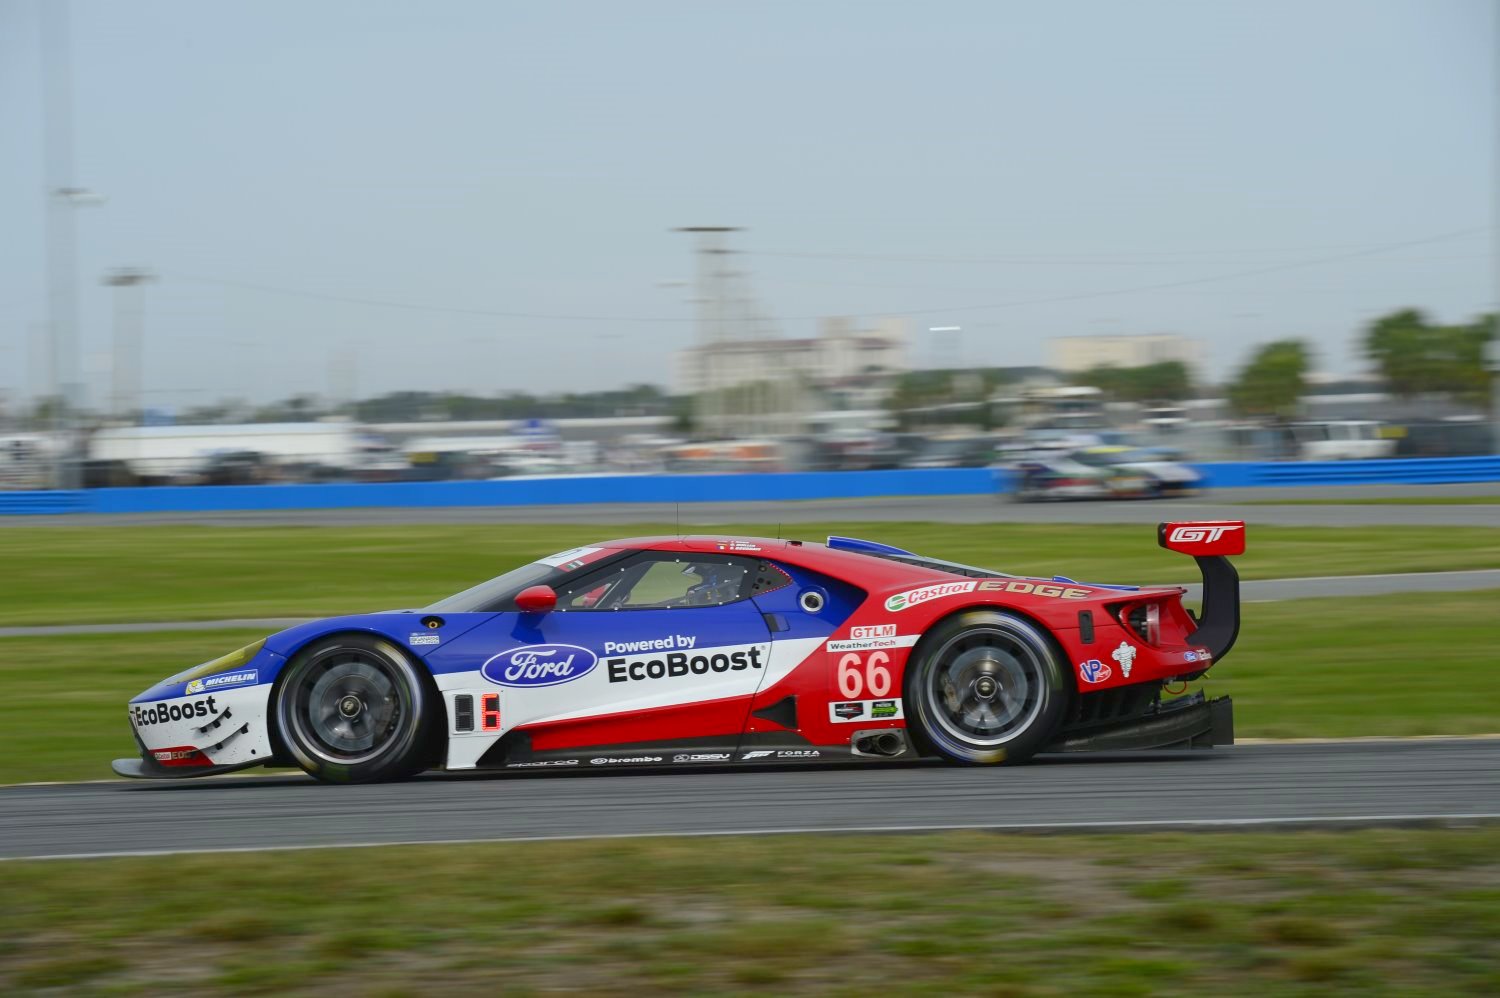 Can the fragile Ford GTs be fixed in time for LeMans?